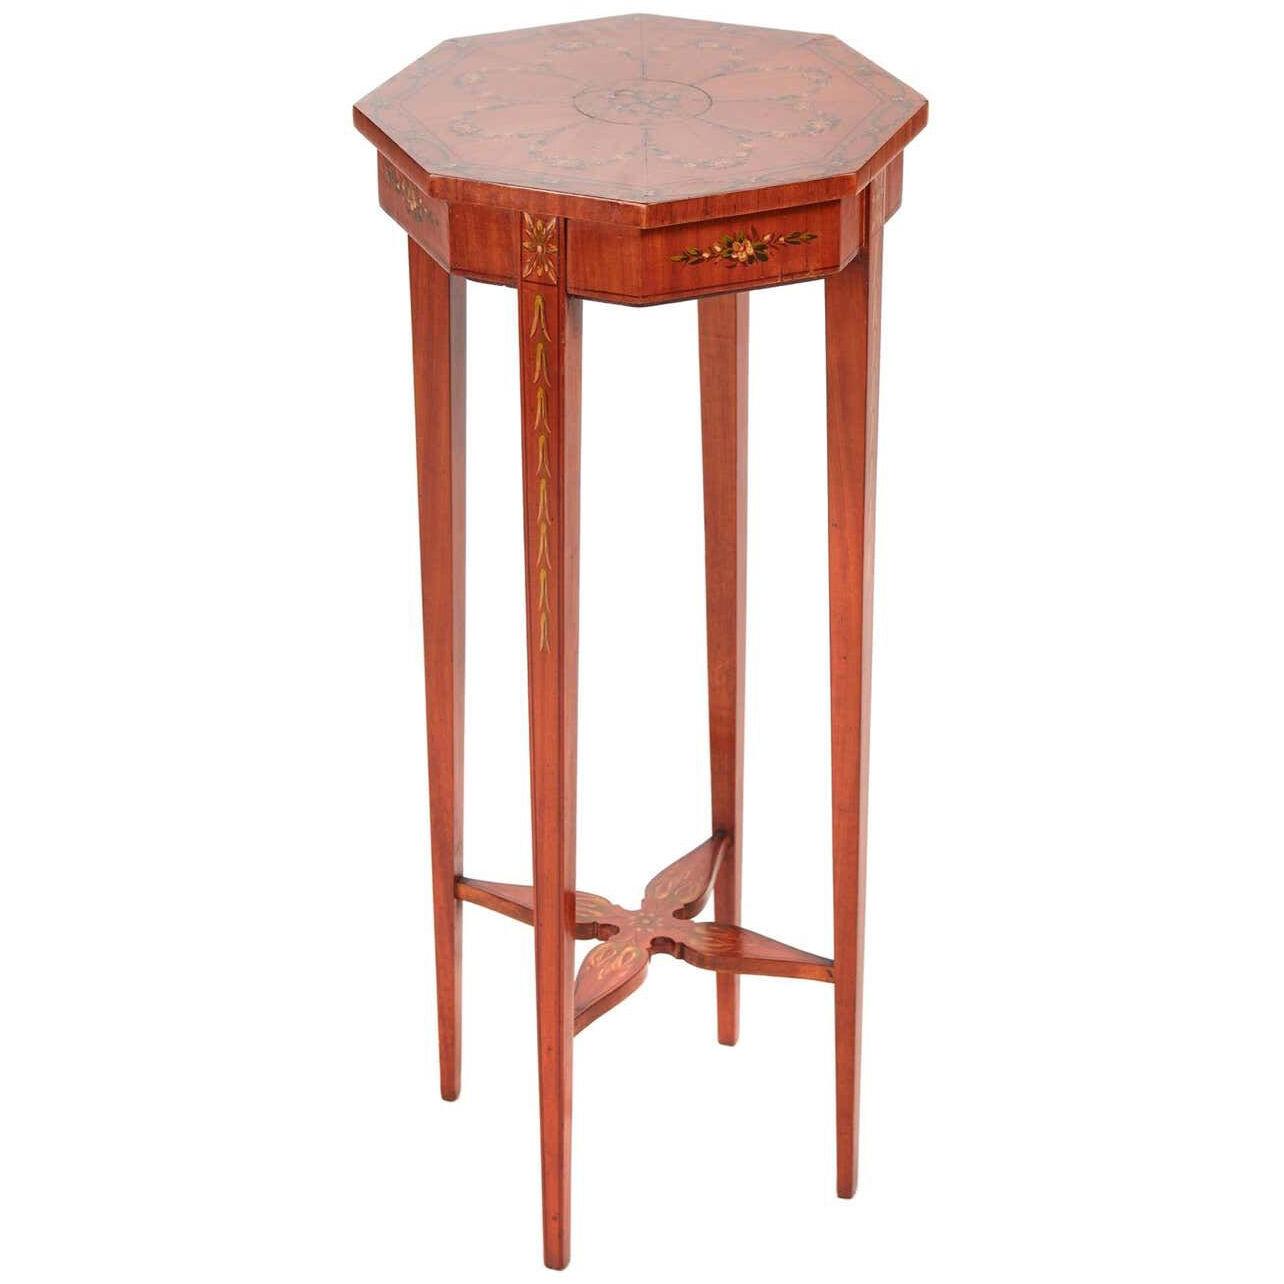 Painted Satinwood Occasional Table or Lamp Table, circa 1870